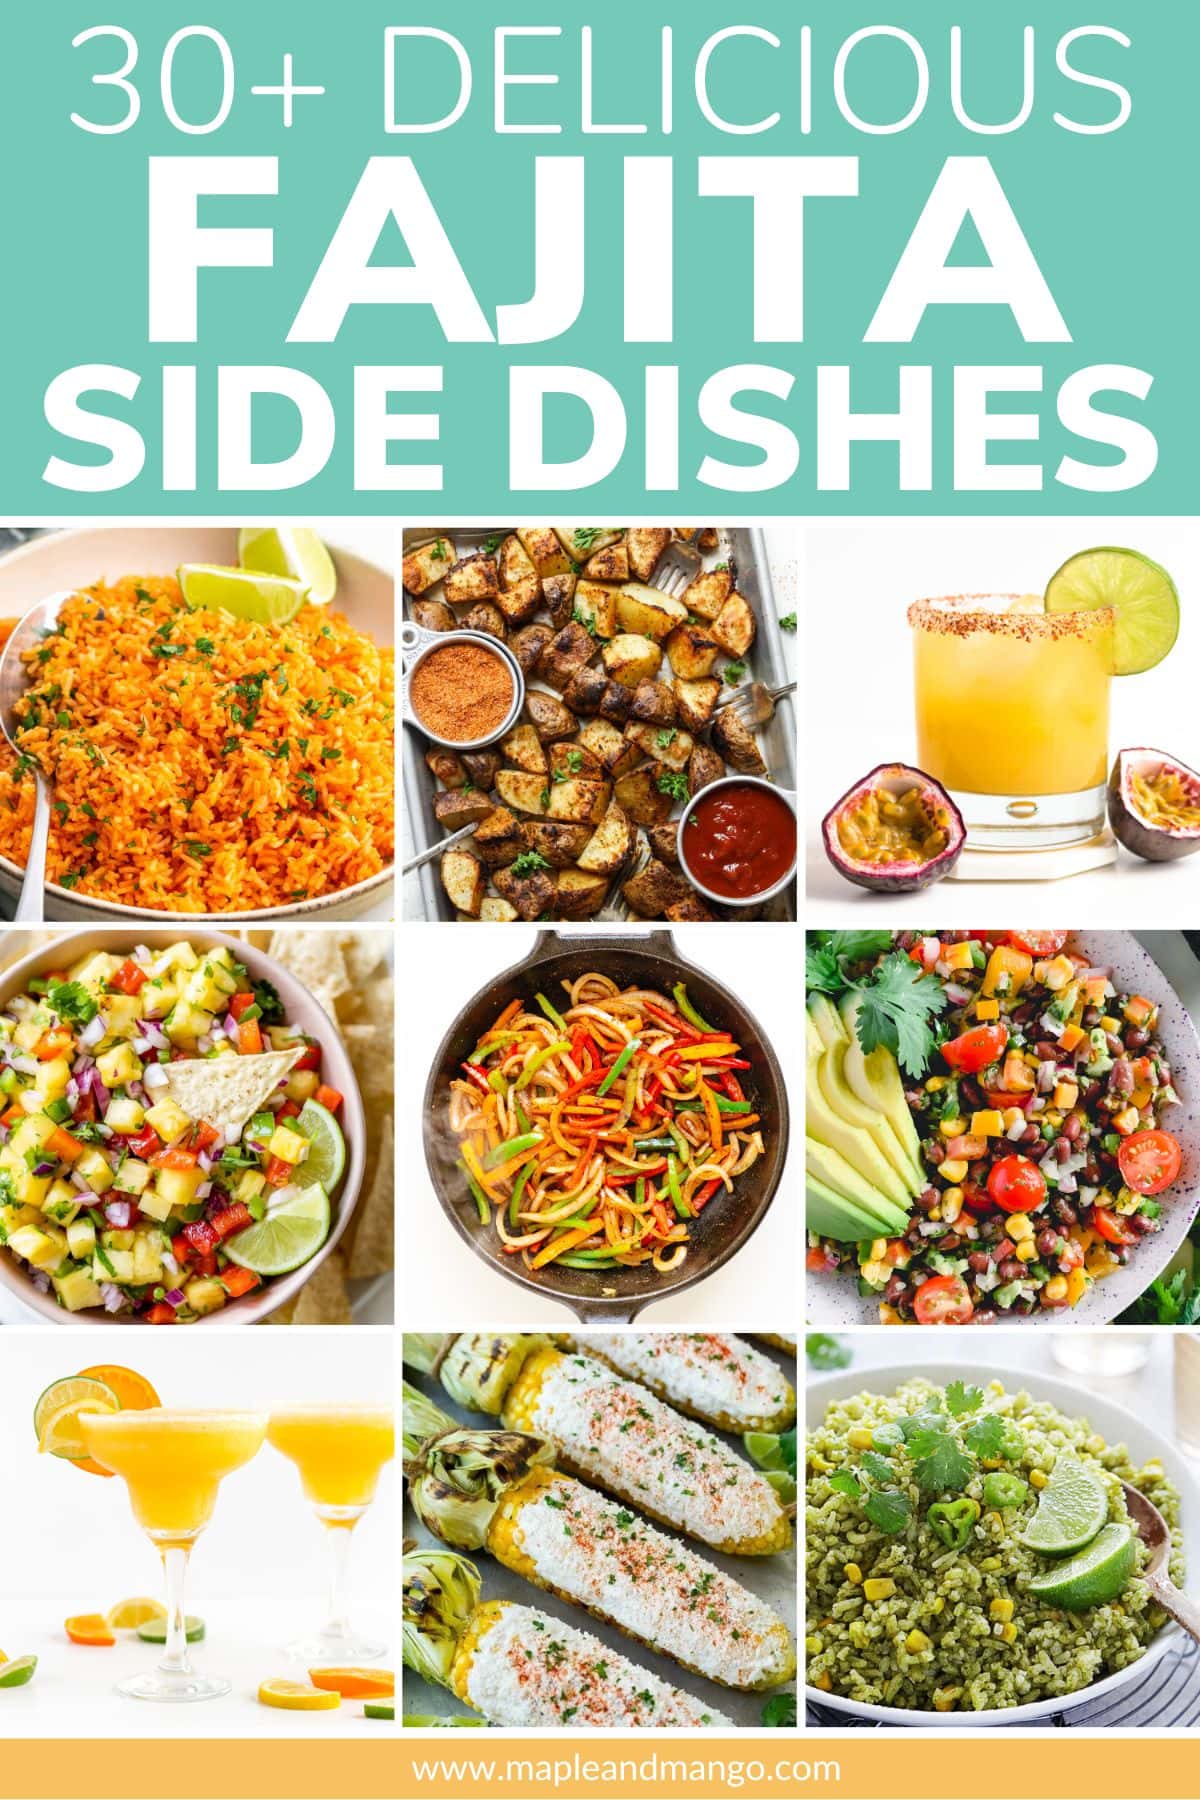 Photo collage of sides for fajitas with text overlay that reads "30+ Delicious Fajita Side Dishes".